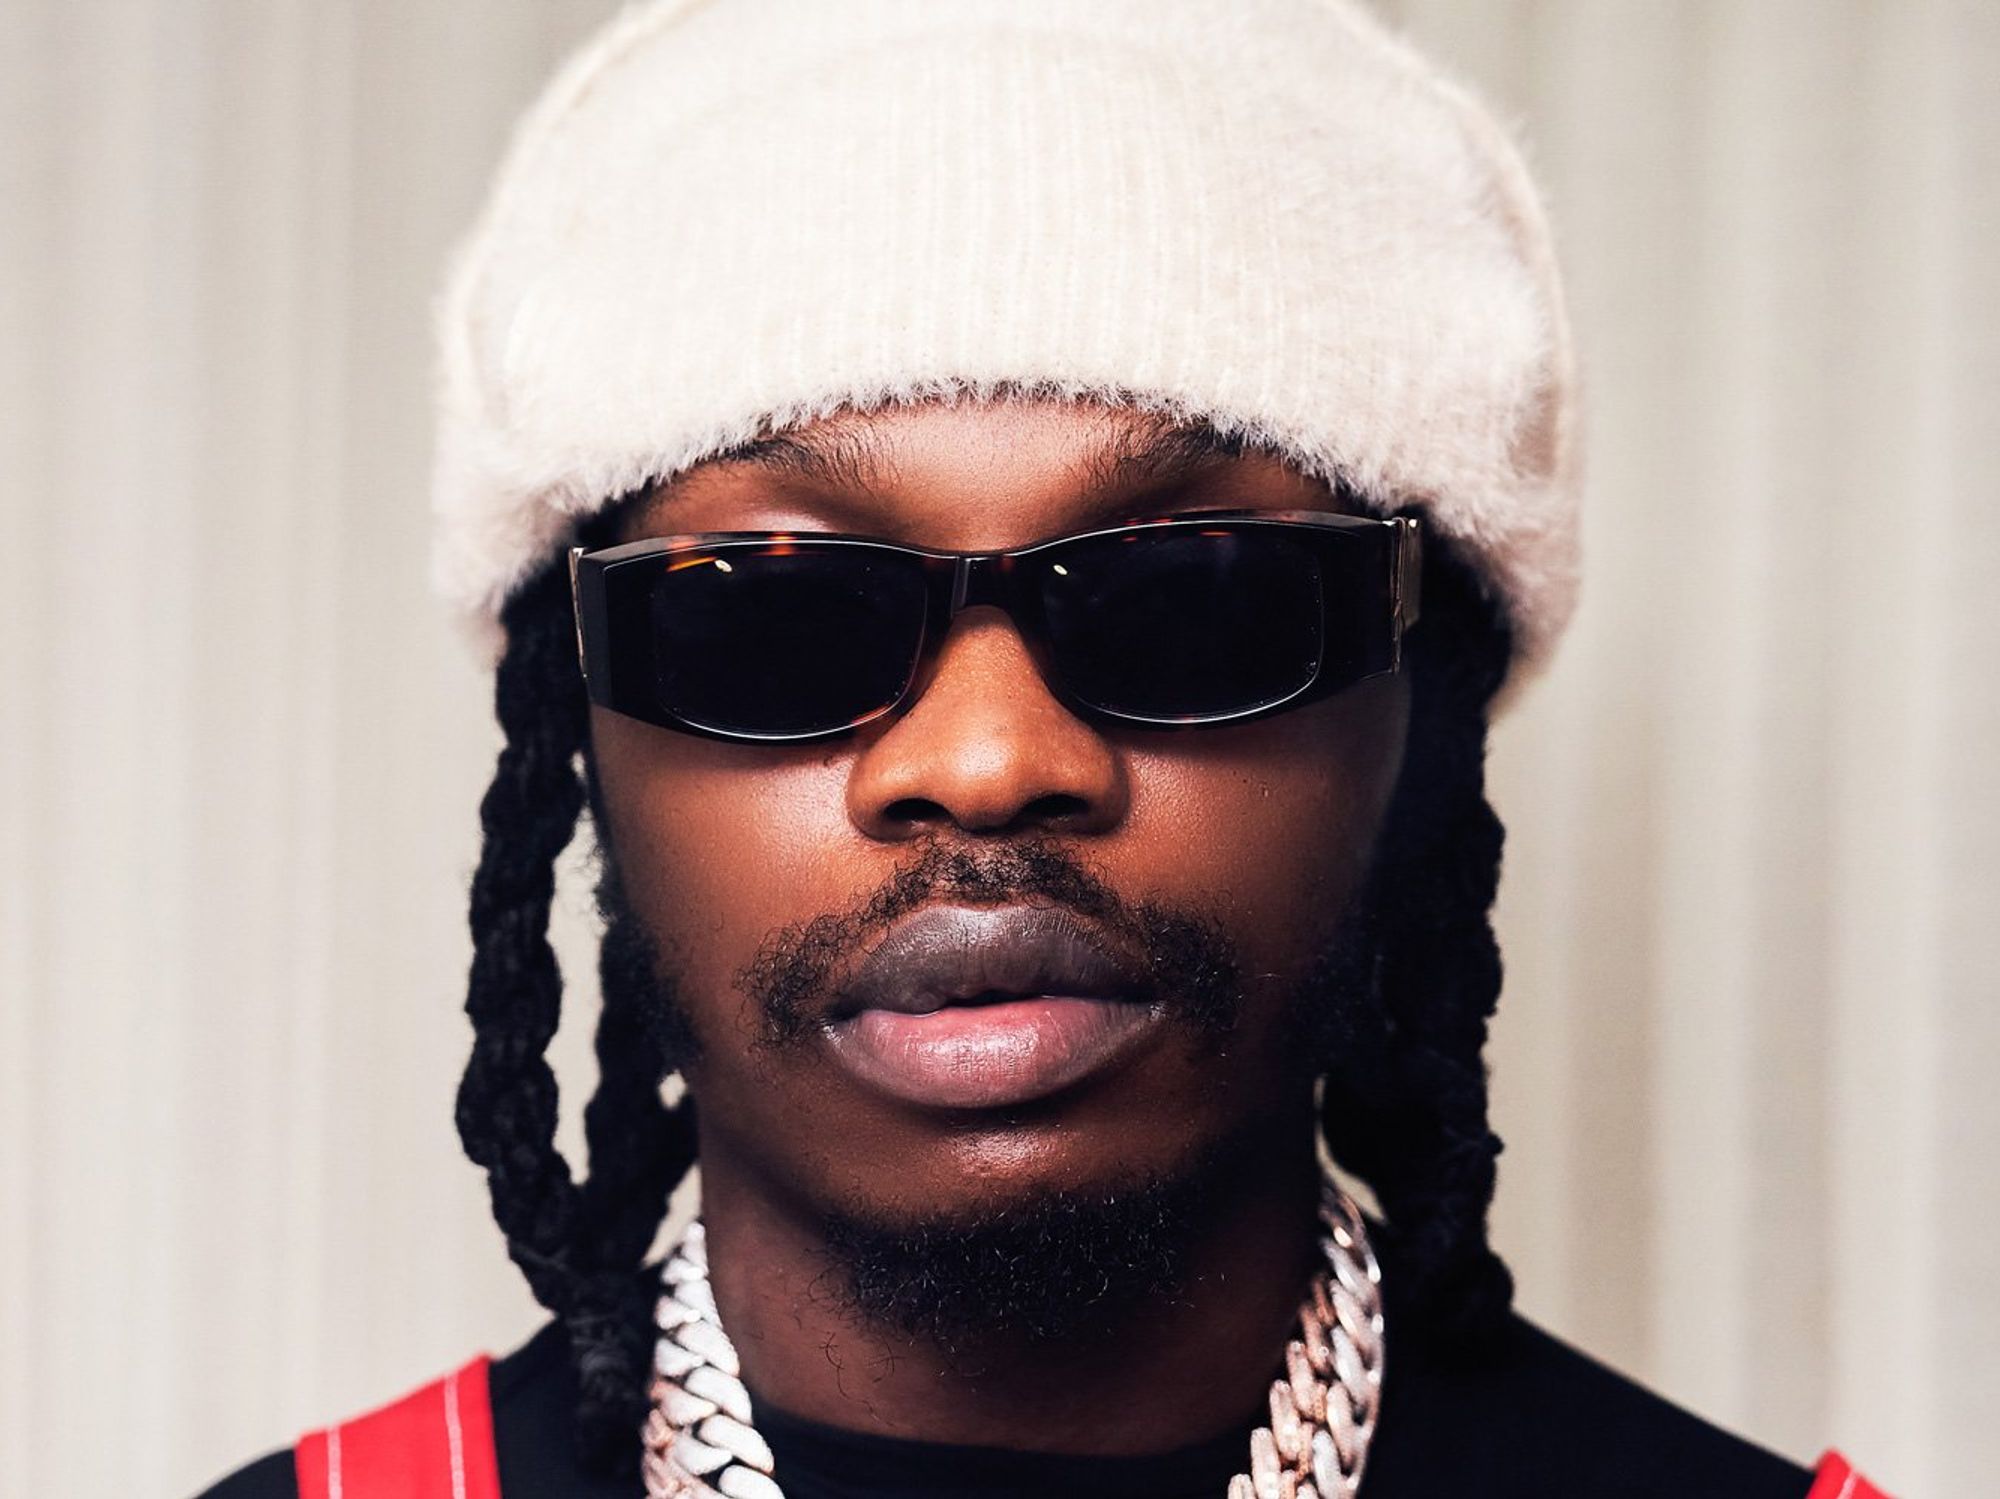 Still shot of Naira Marley with sunglasses and beanie. 